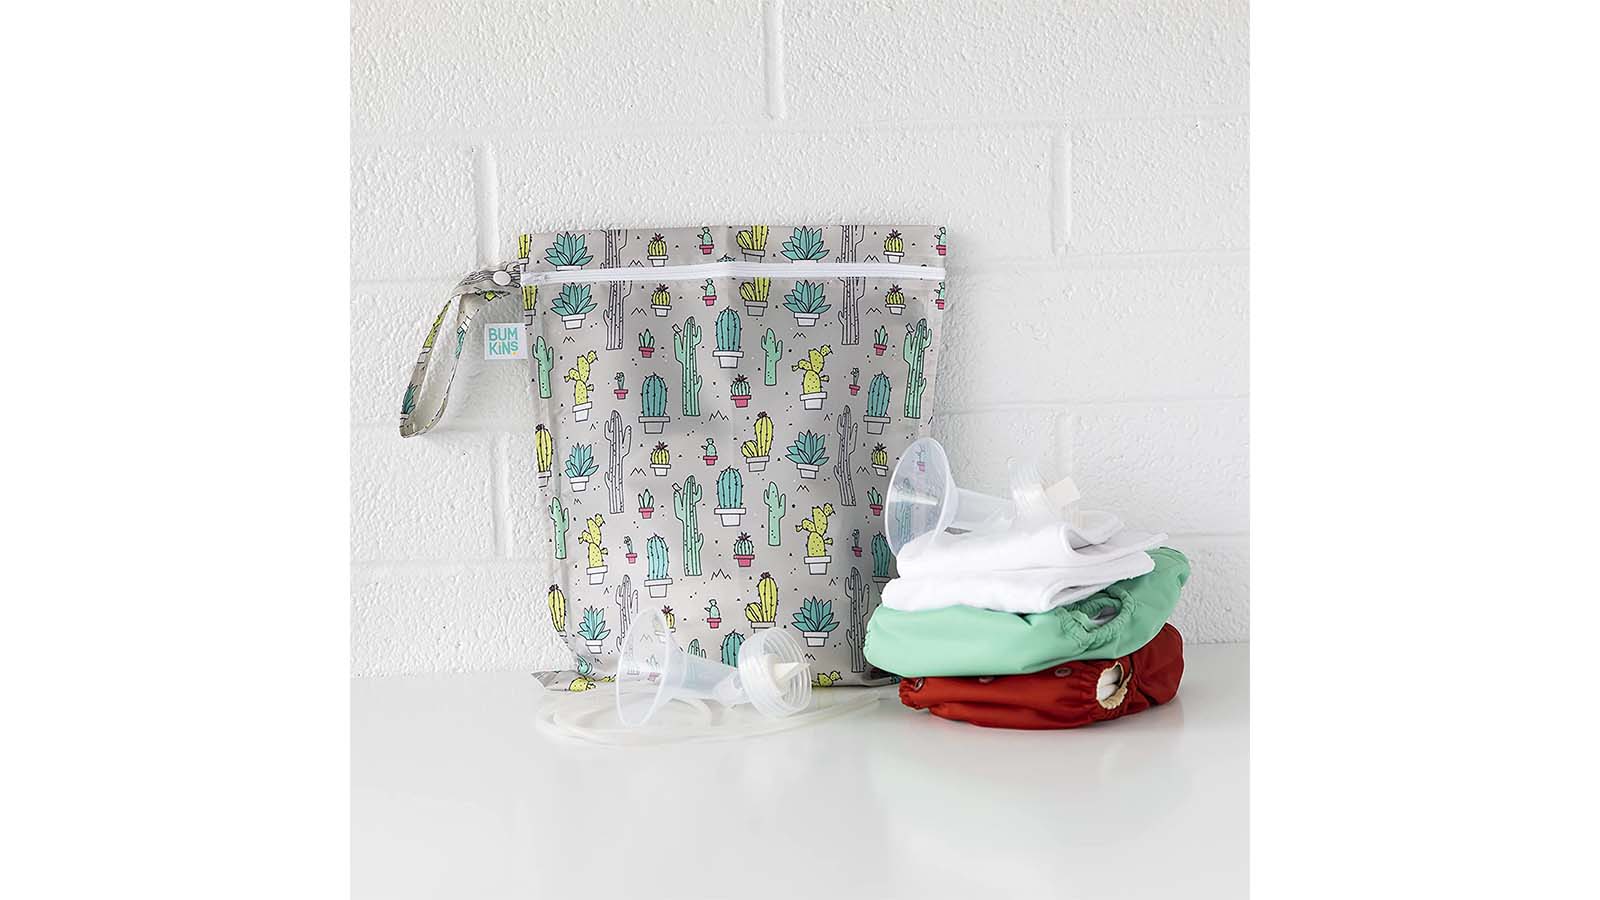 Easy baby traveler diaper bag organizer! What you NEED in your diaper bag &  essentials for baby! 